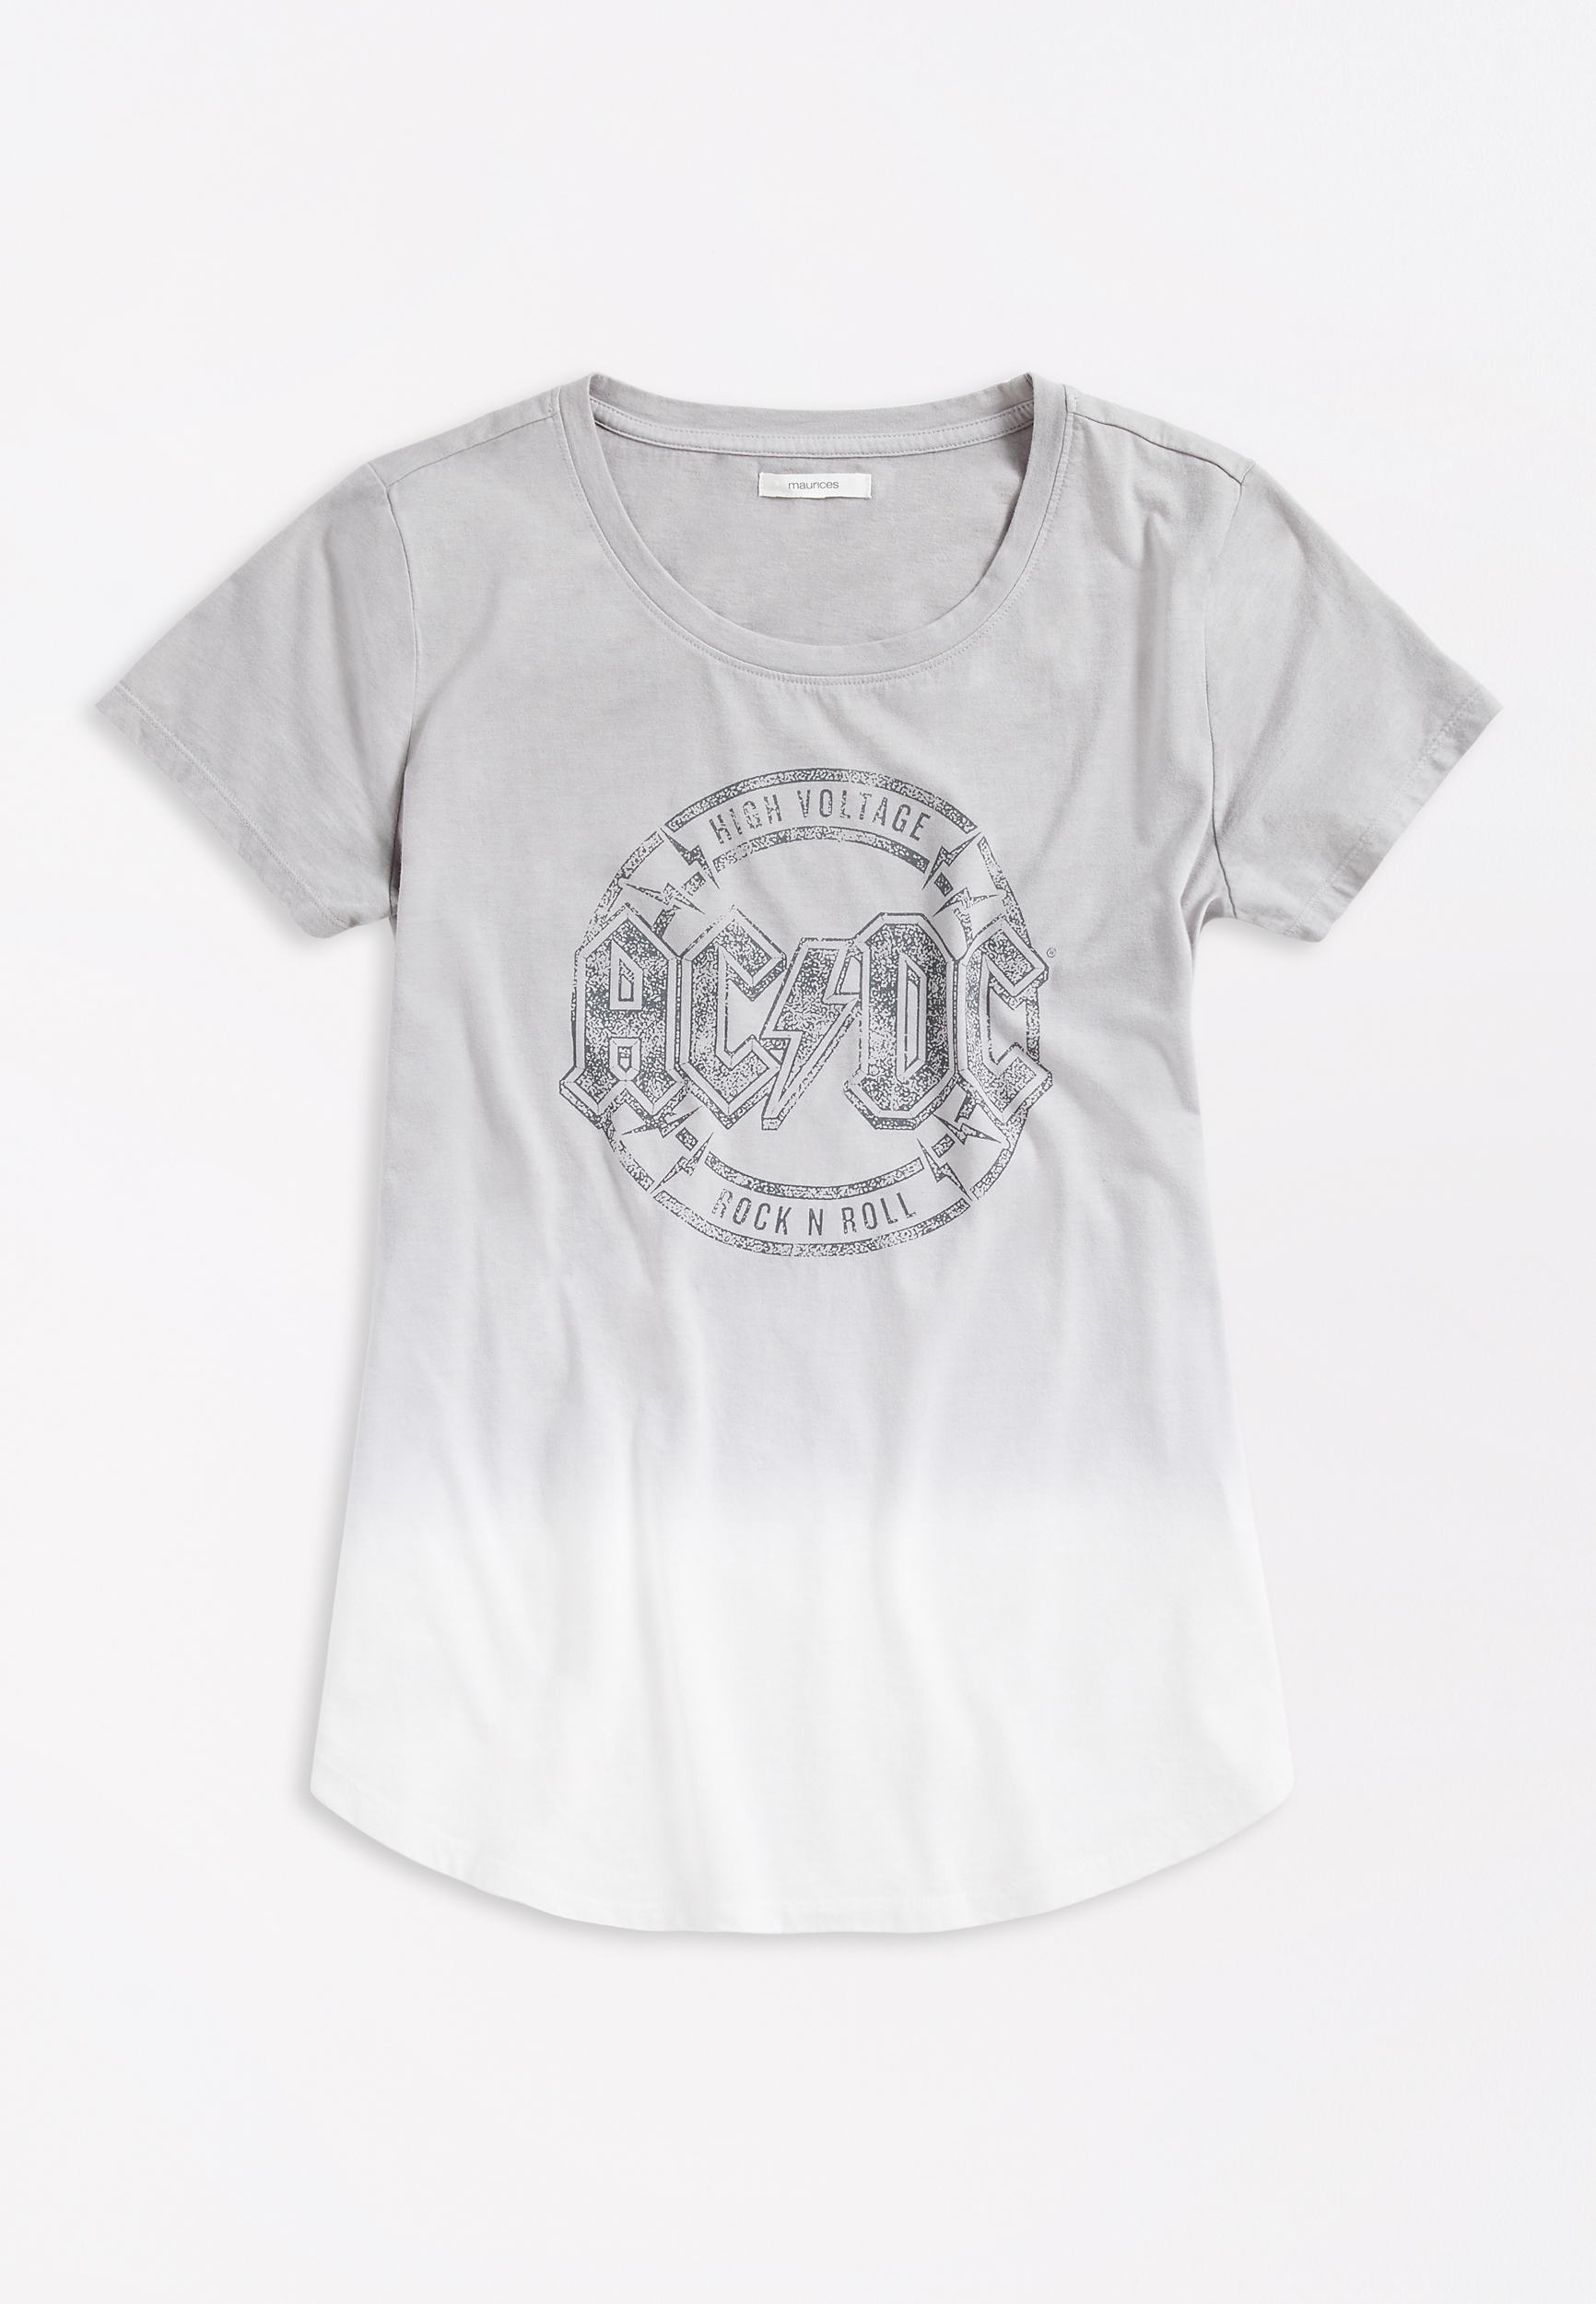 Plus Size Gray ACDC Graphic Tee | maurices